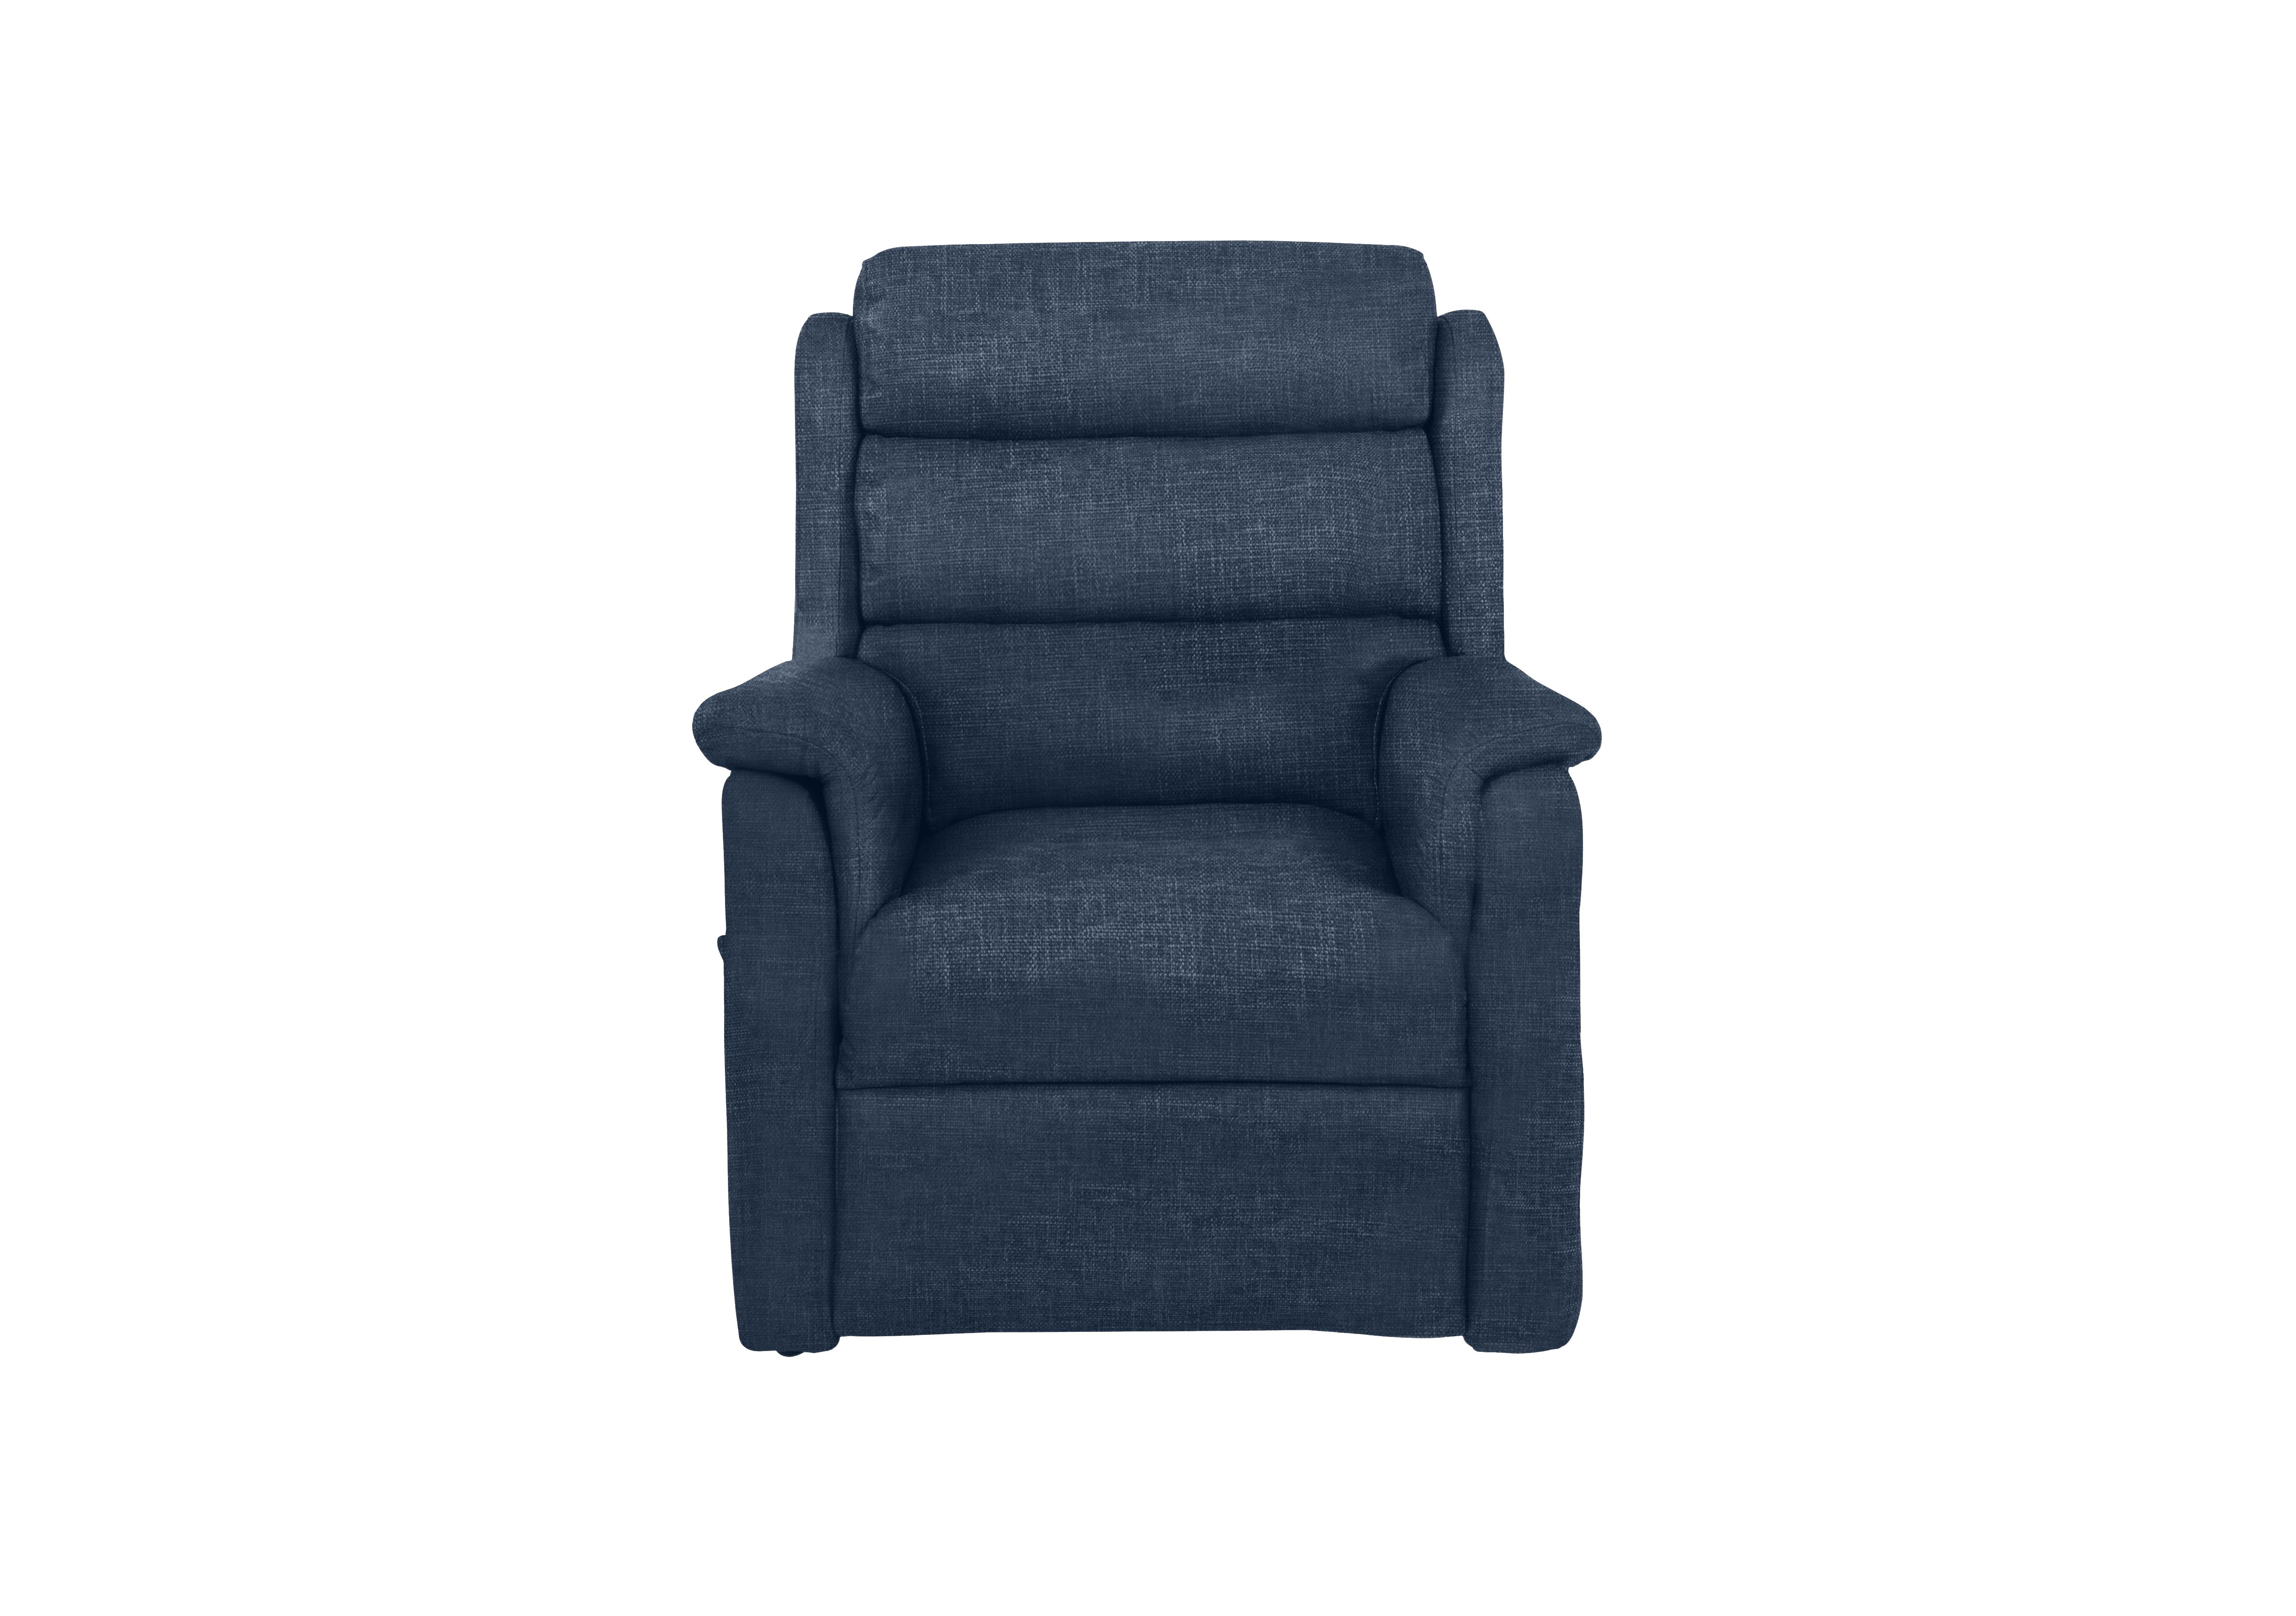 My Chair McCoy Fabric Lift and Rise Chair in 15045 Blue Anivia 15 on Furniture Village